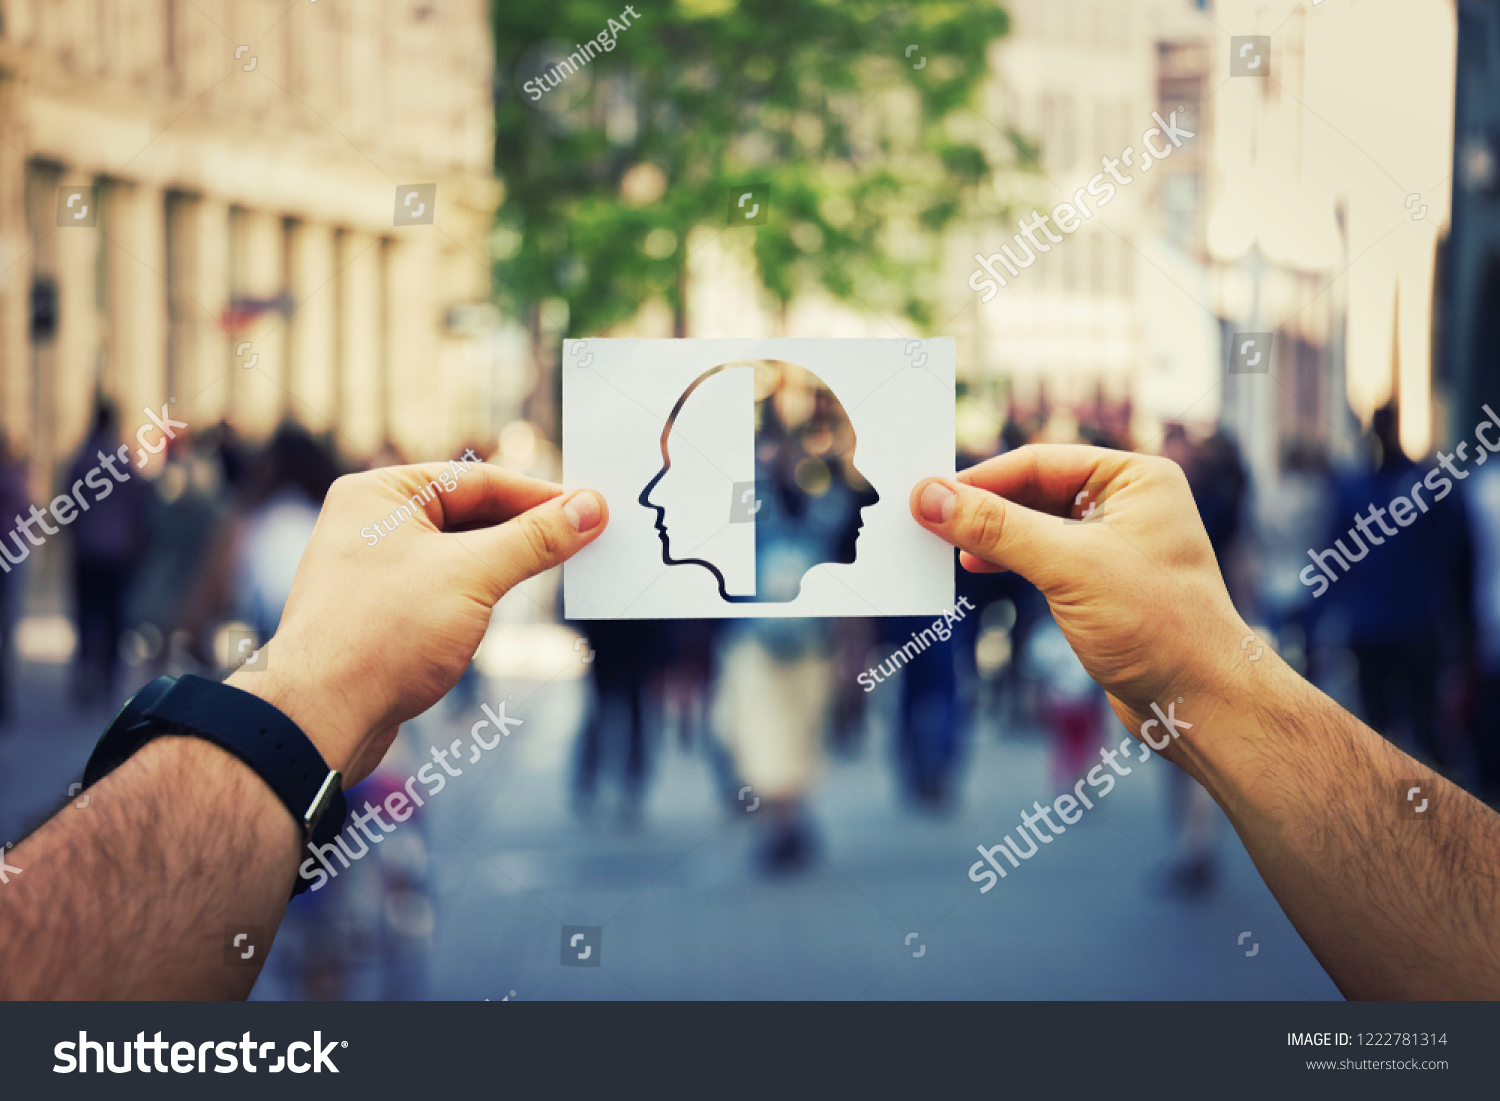 Man hands holding a white paper sheet with two faced head over a crowded street background. Split personality, bipolar mental health disorder concept. Schizophrenia psychiatric disease. #1222781314